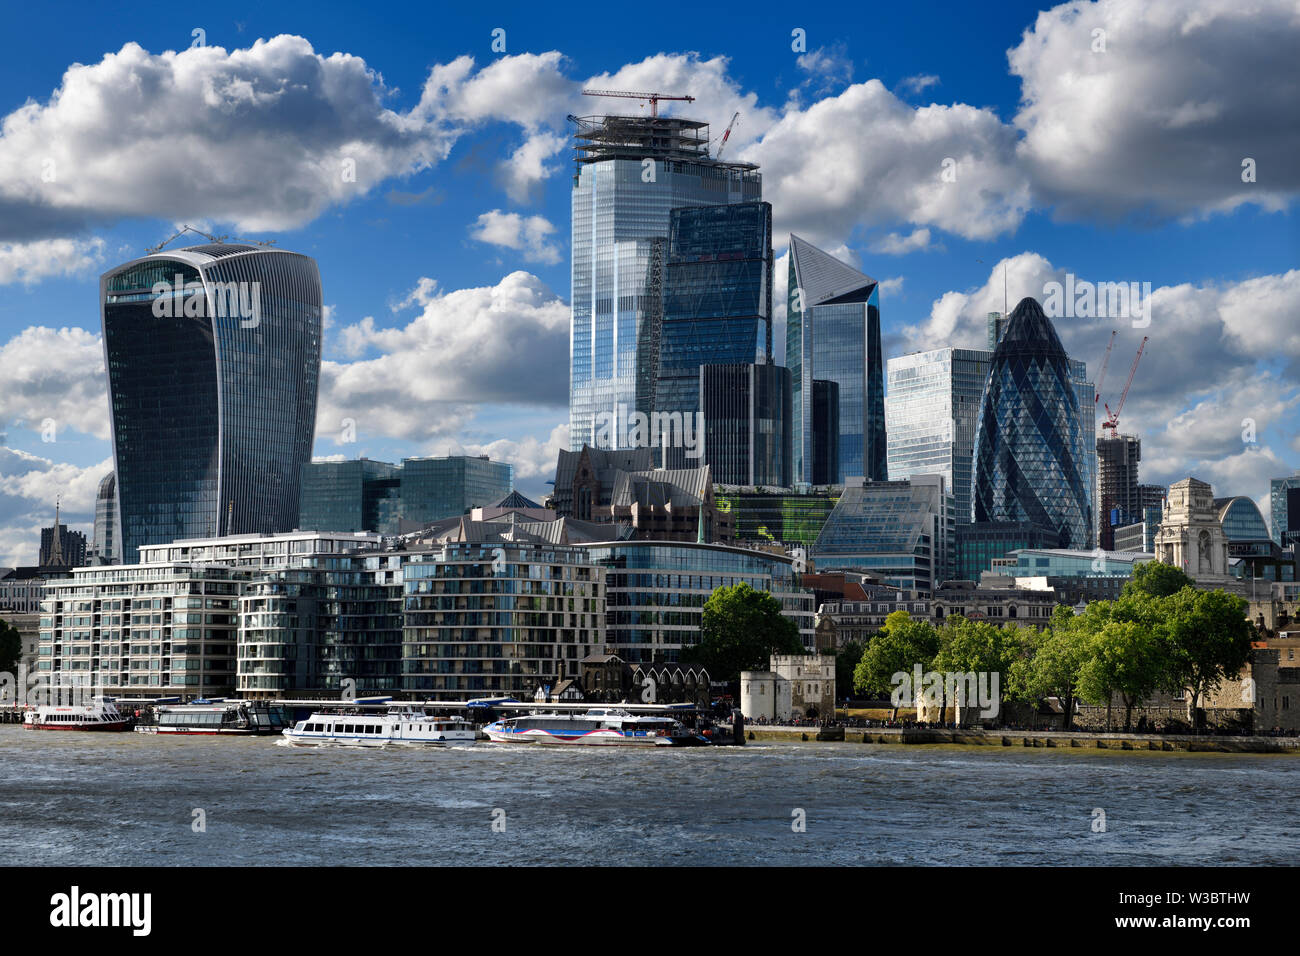 Tower Pier with tour boats on the River Thames financial district skyscrapers Walkie Talkie Cheesegrater Scalpel and the Gherkin London England Stock Photo